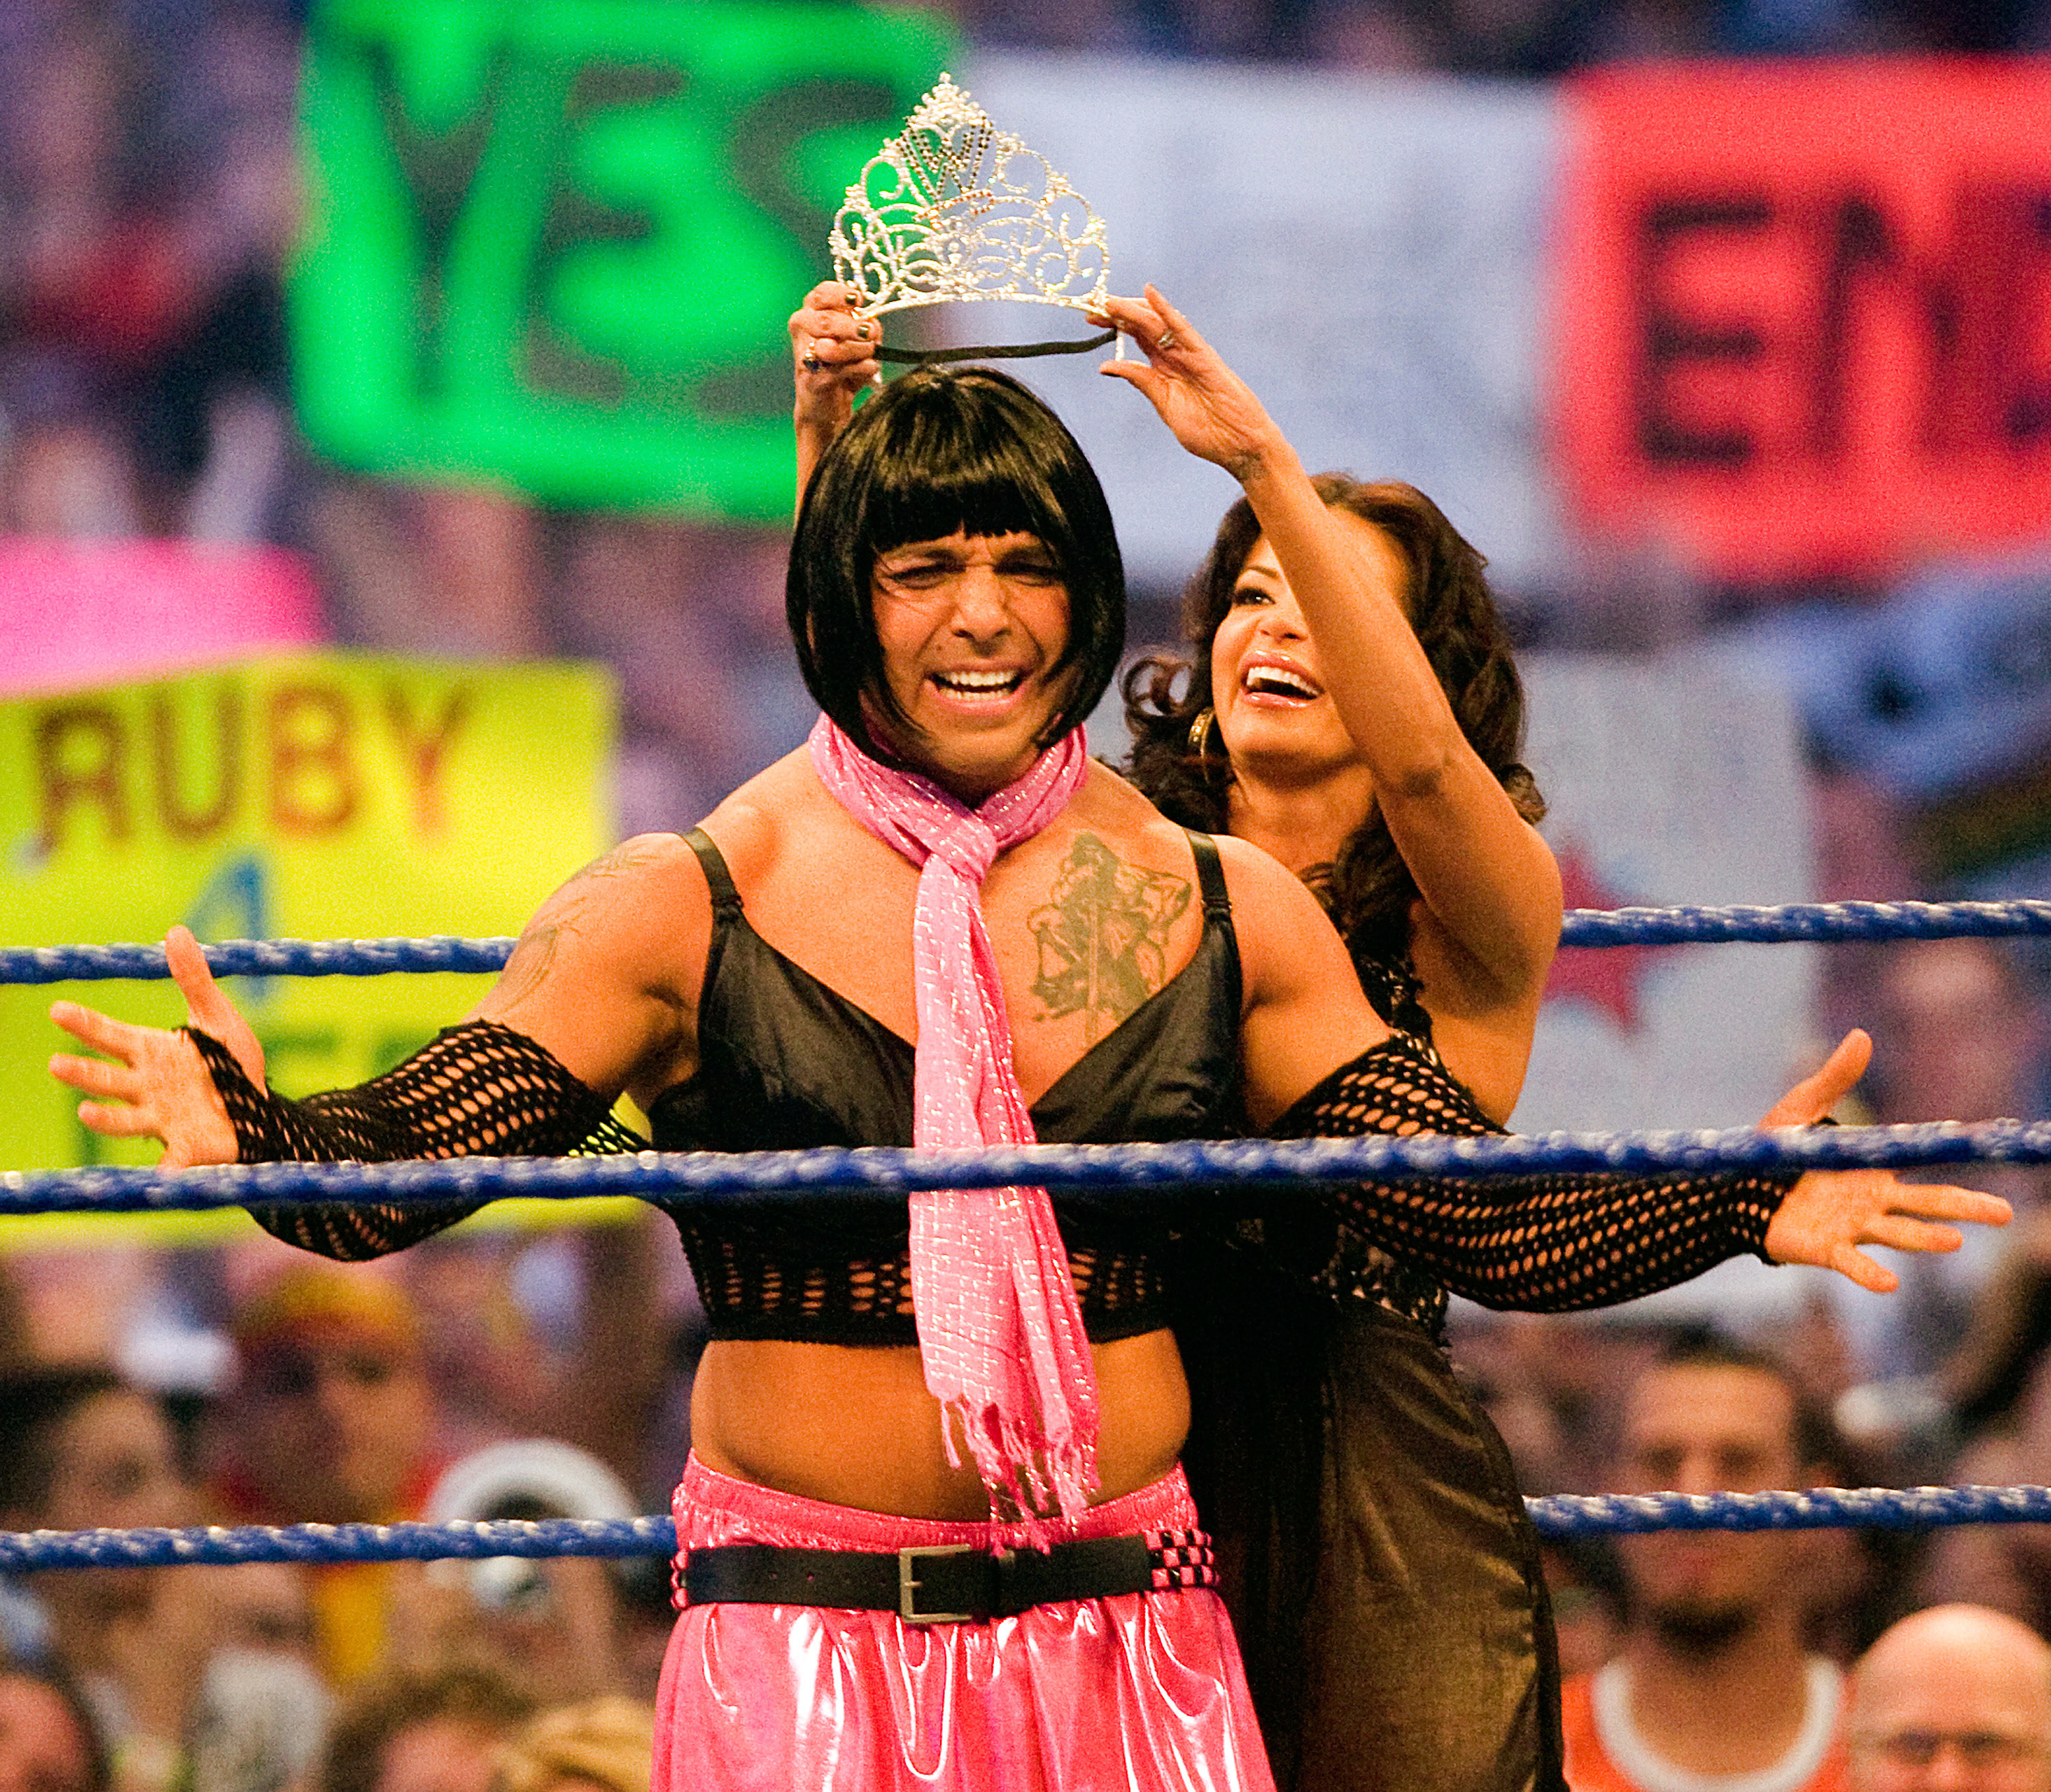 Santino Marella, disguised as his sister &quot;Santina,&quot; wins the 2009 Miss Wrestlemania Battle Royale